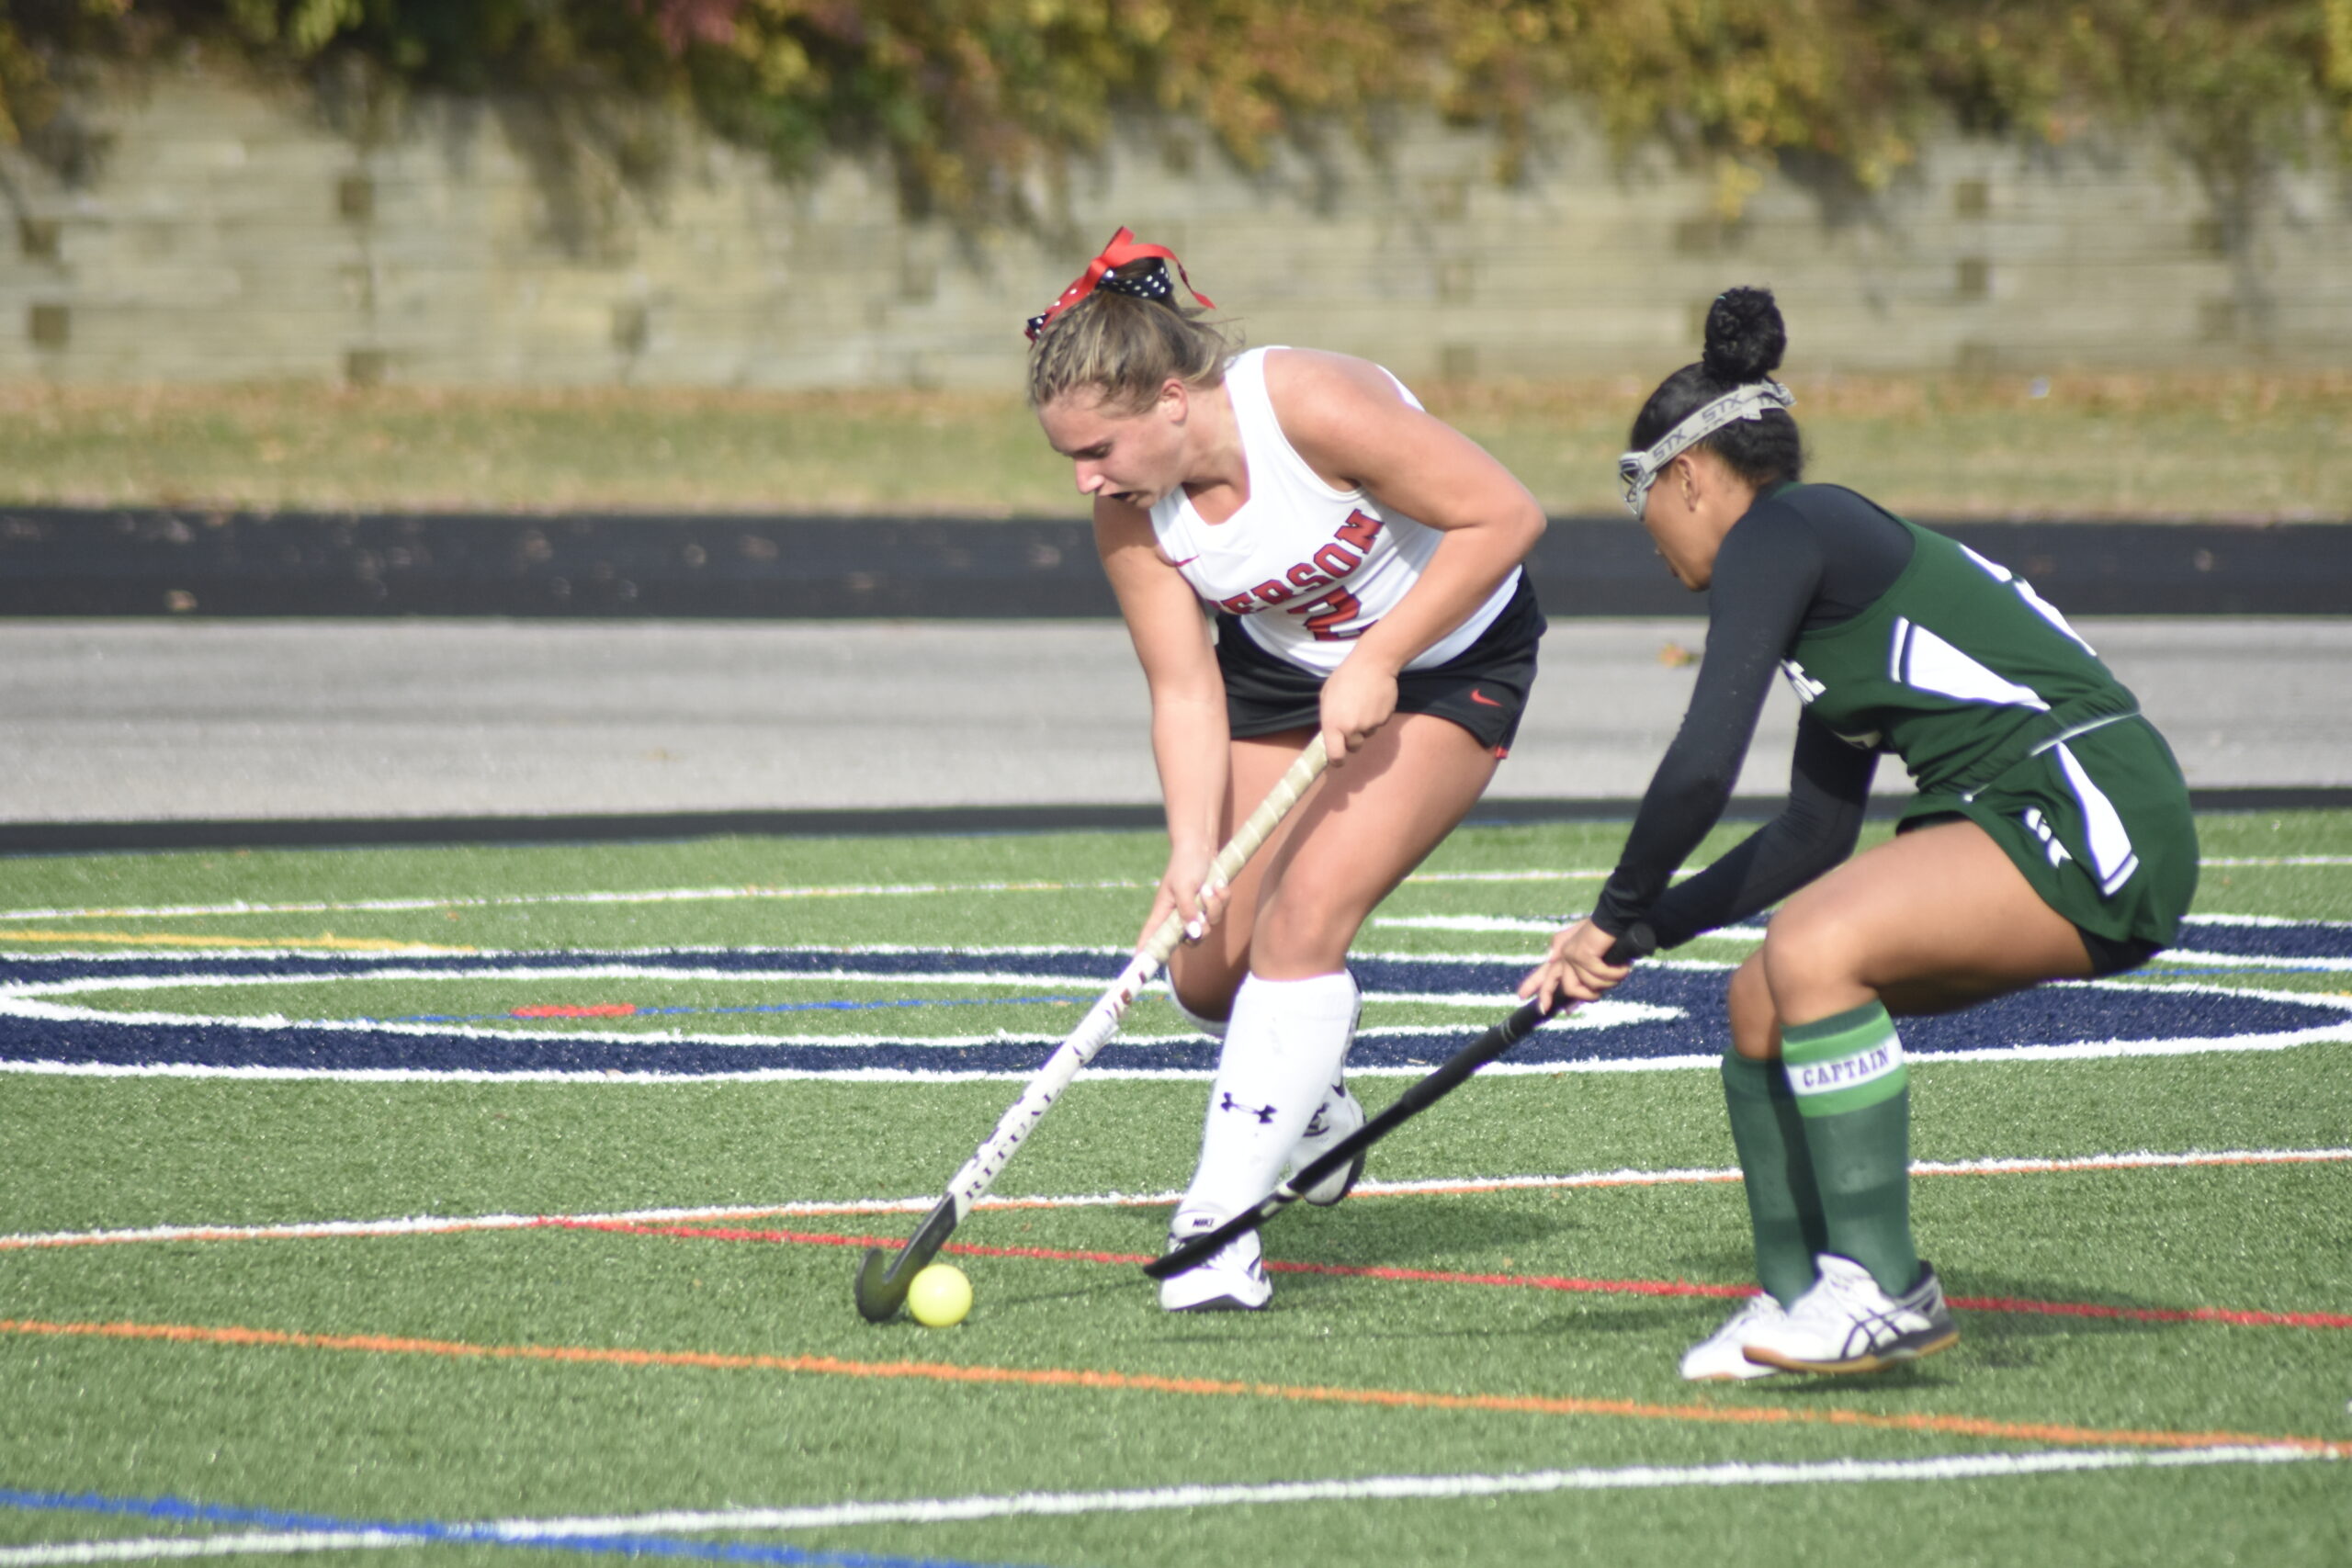 Lily Perello is returning for the Pierson field hockey team.  DREW BUDD